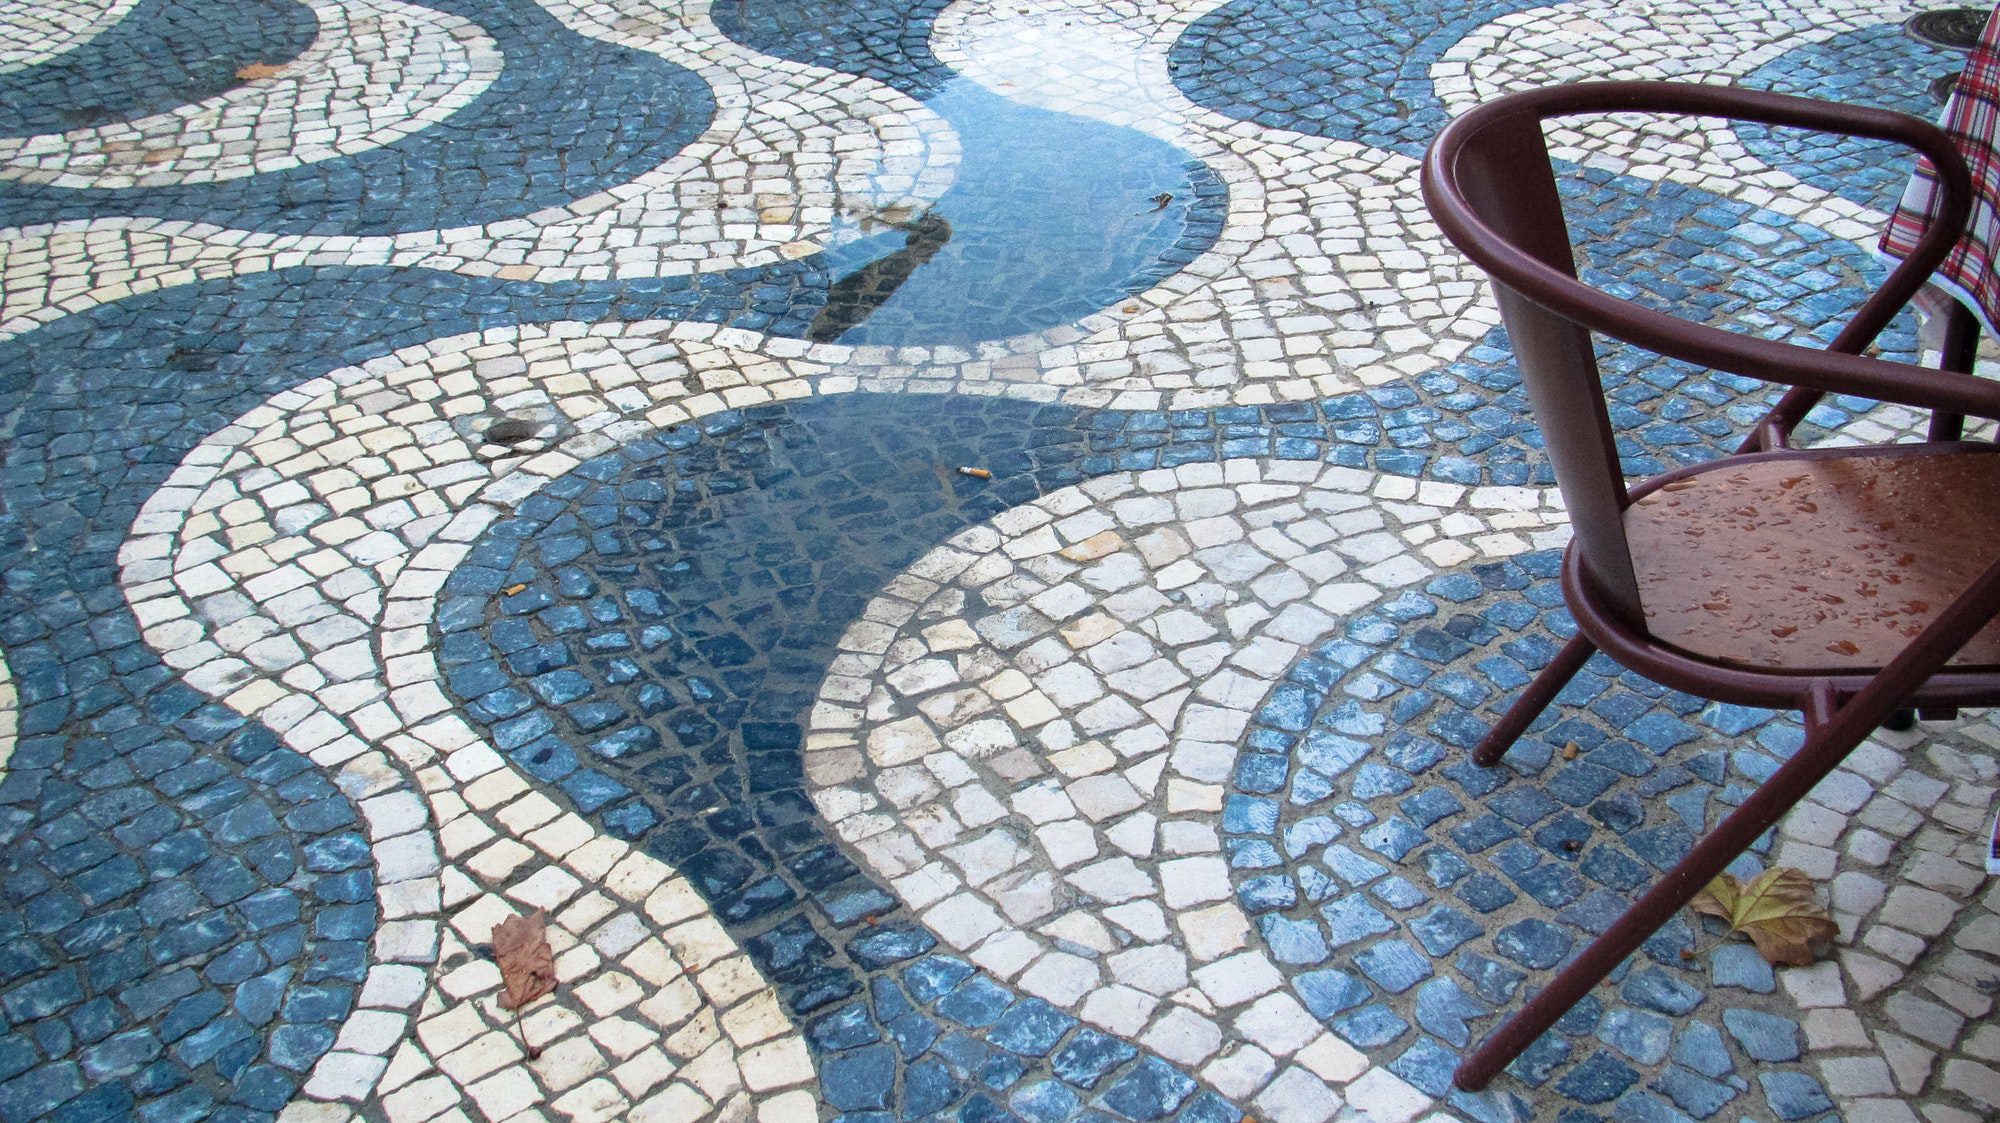 Wet outdoor furniture on a cobbled street. Photo was taken in cascais, portugal in november of 2014